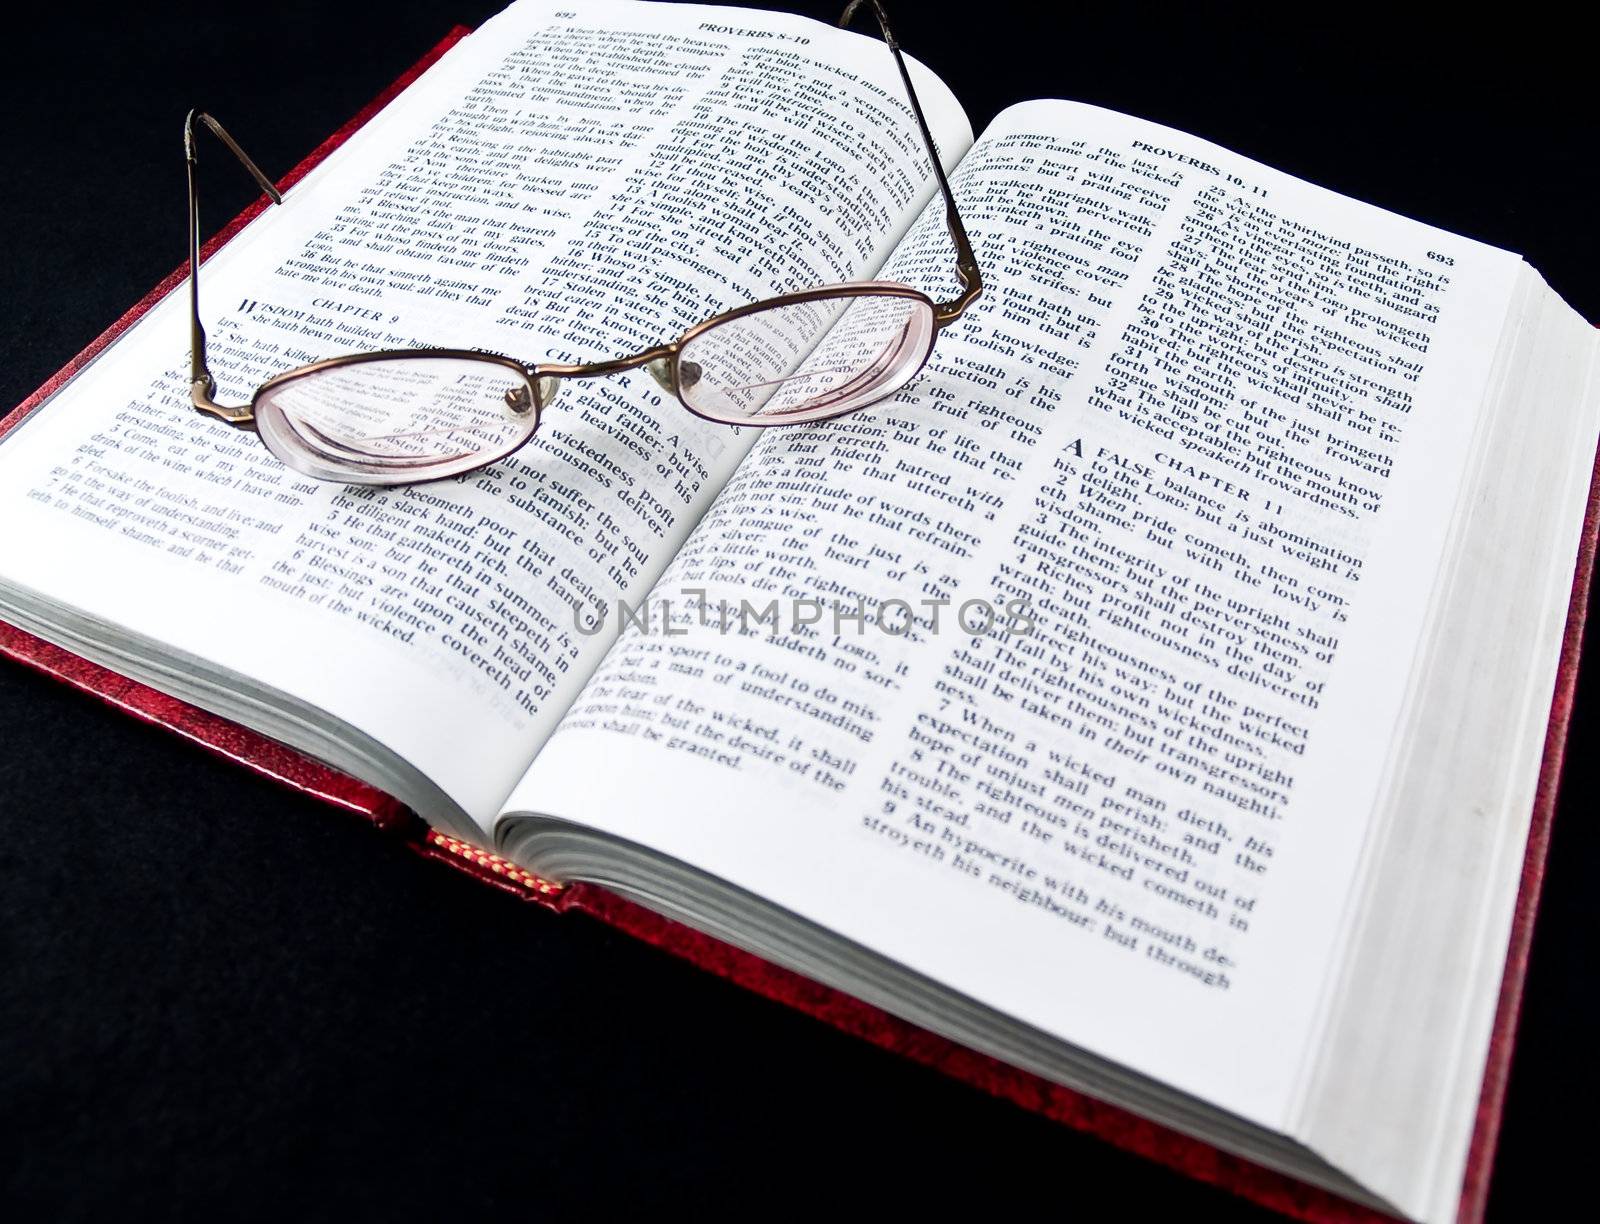 The Bible opened to the Book of Proverbs with Glasses